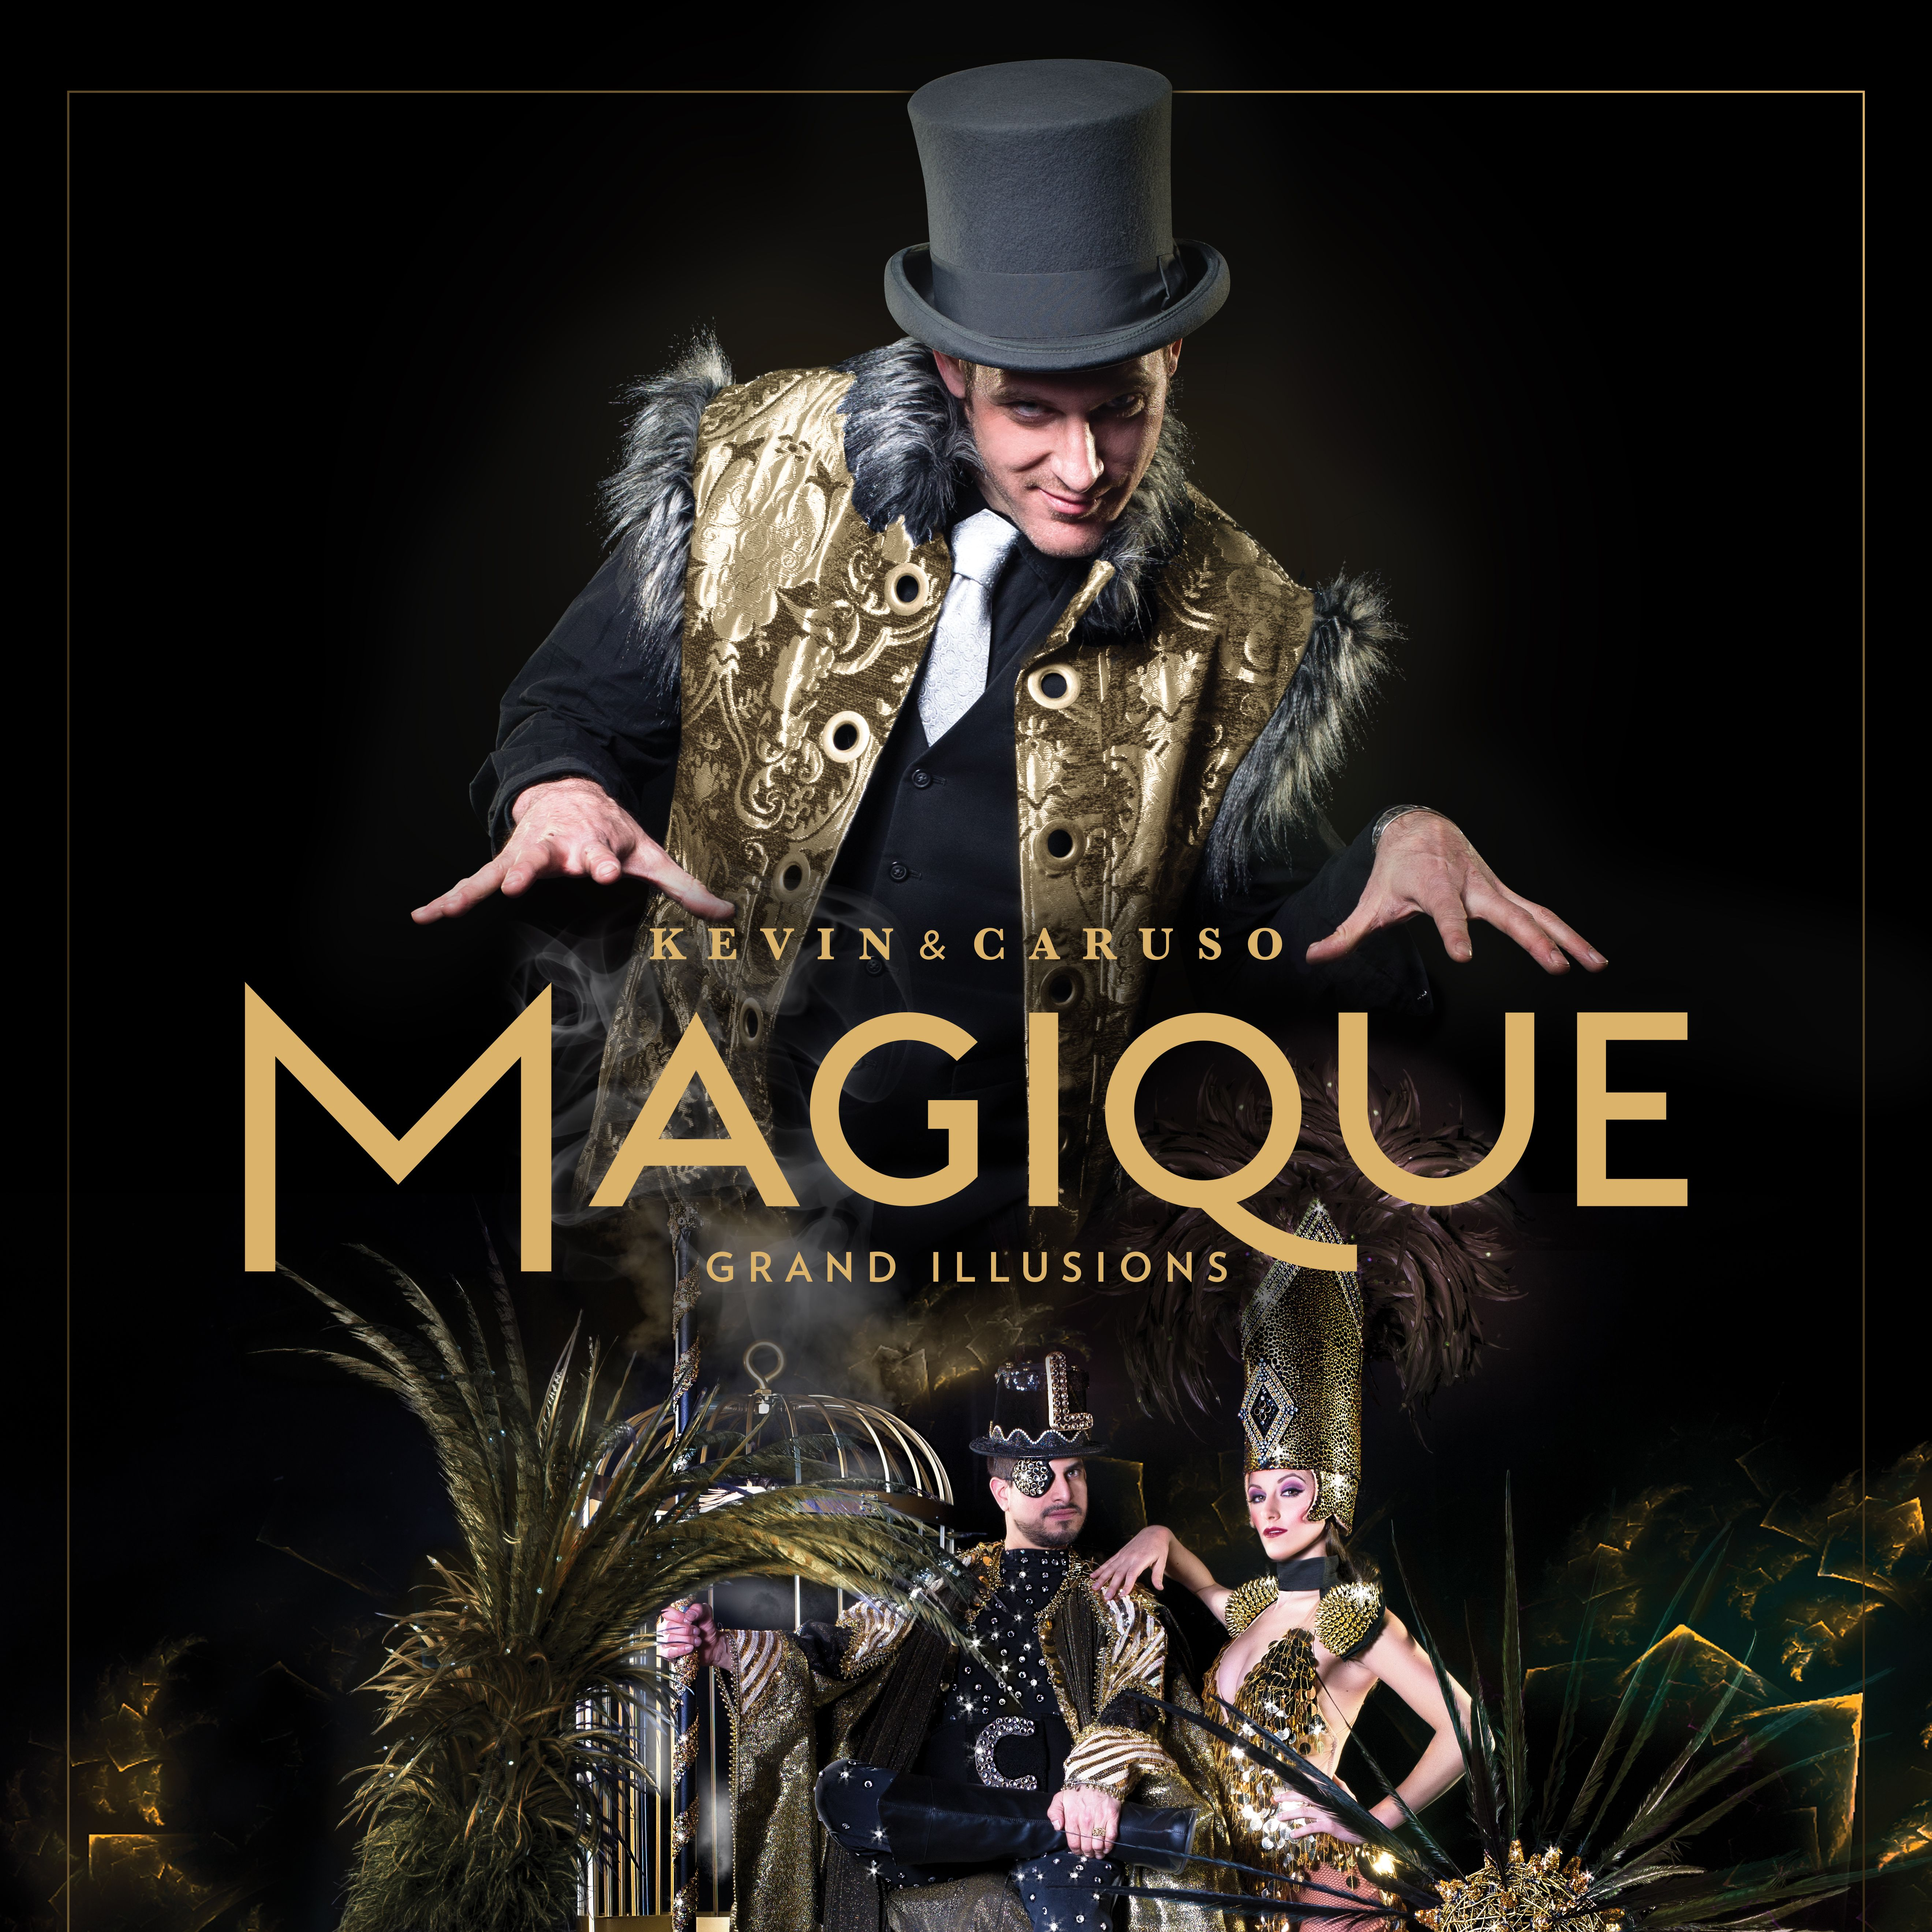 Kevin & Caruso - Magique - Special Guest Madame Houdini Hotel Packages - New Year’s Eve Niagara Falls